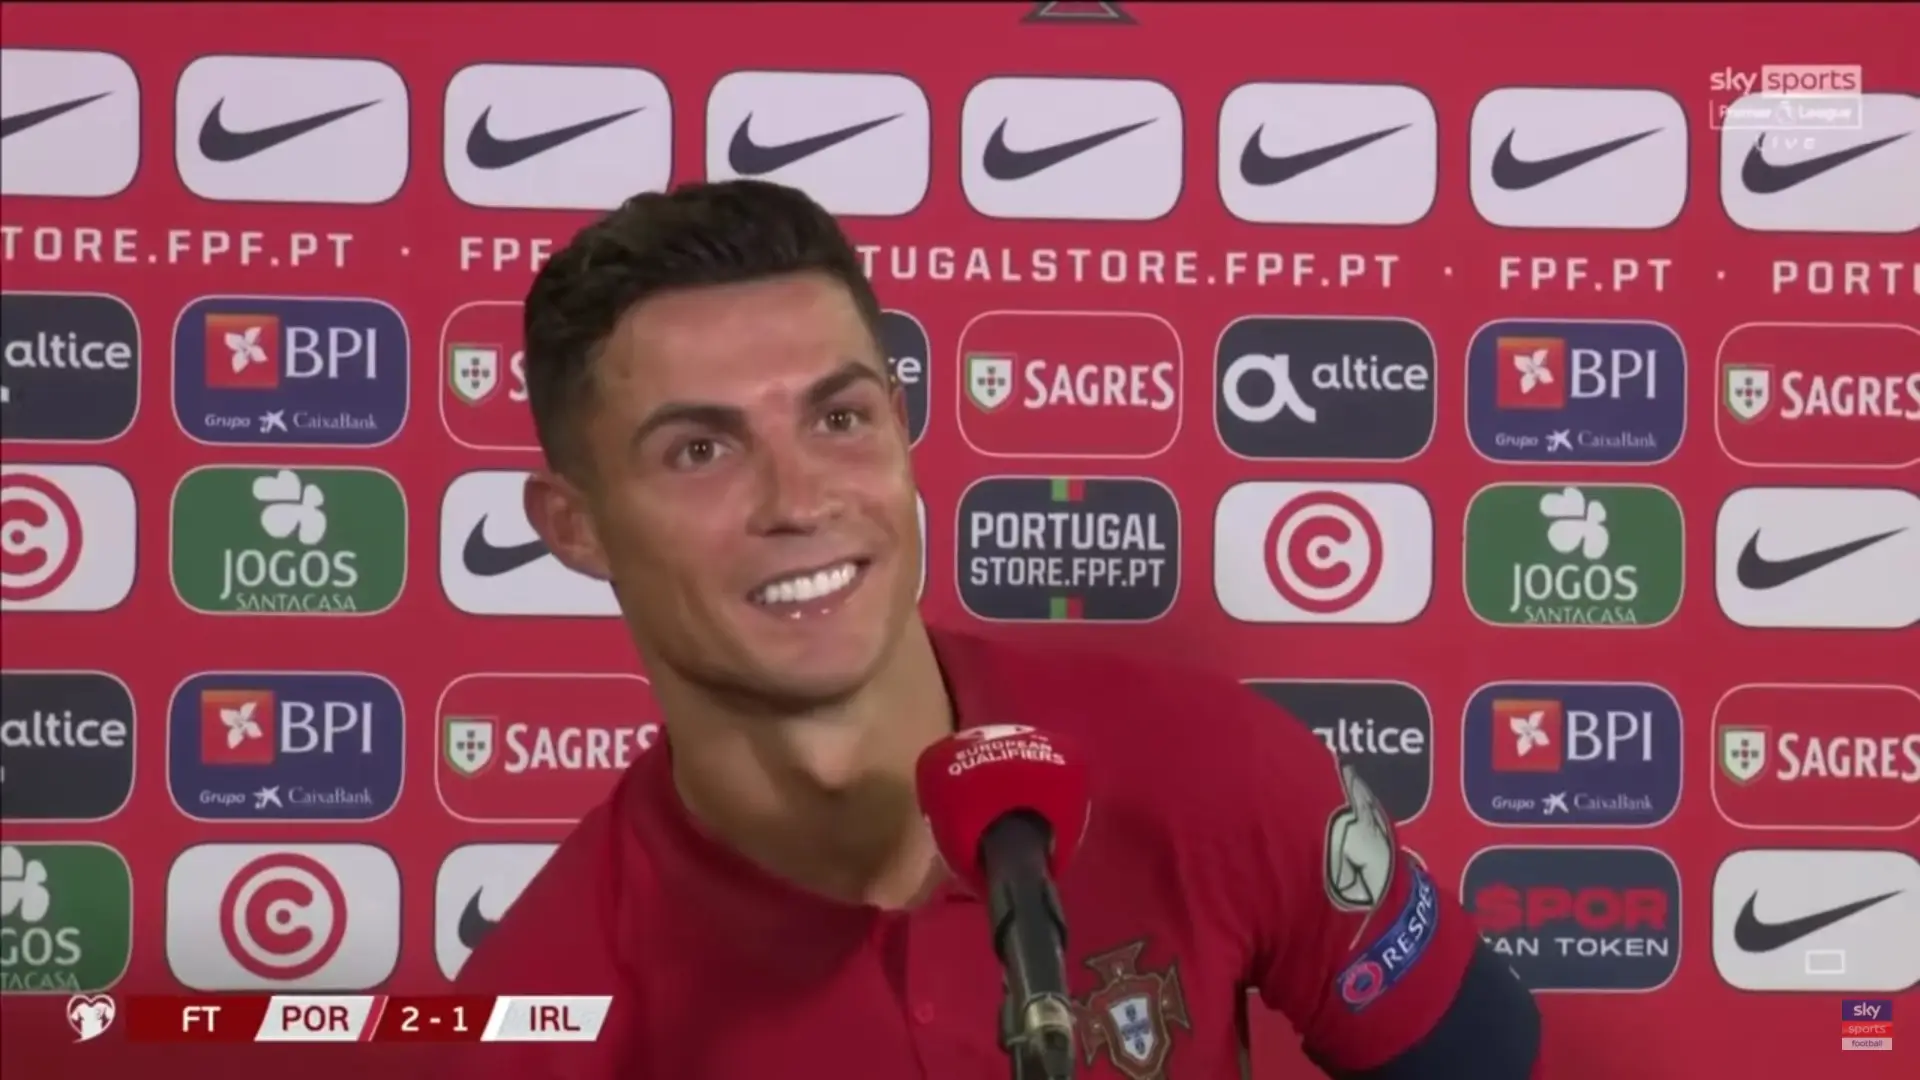 'I'm not closing the count just yet...': Cristiano reacts to breaking international scoring record